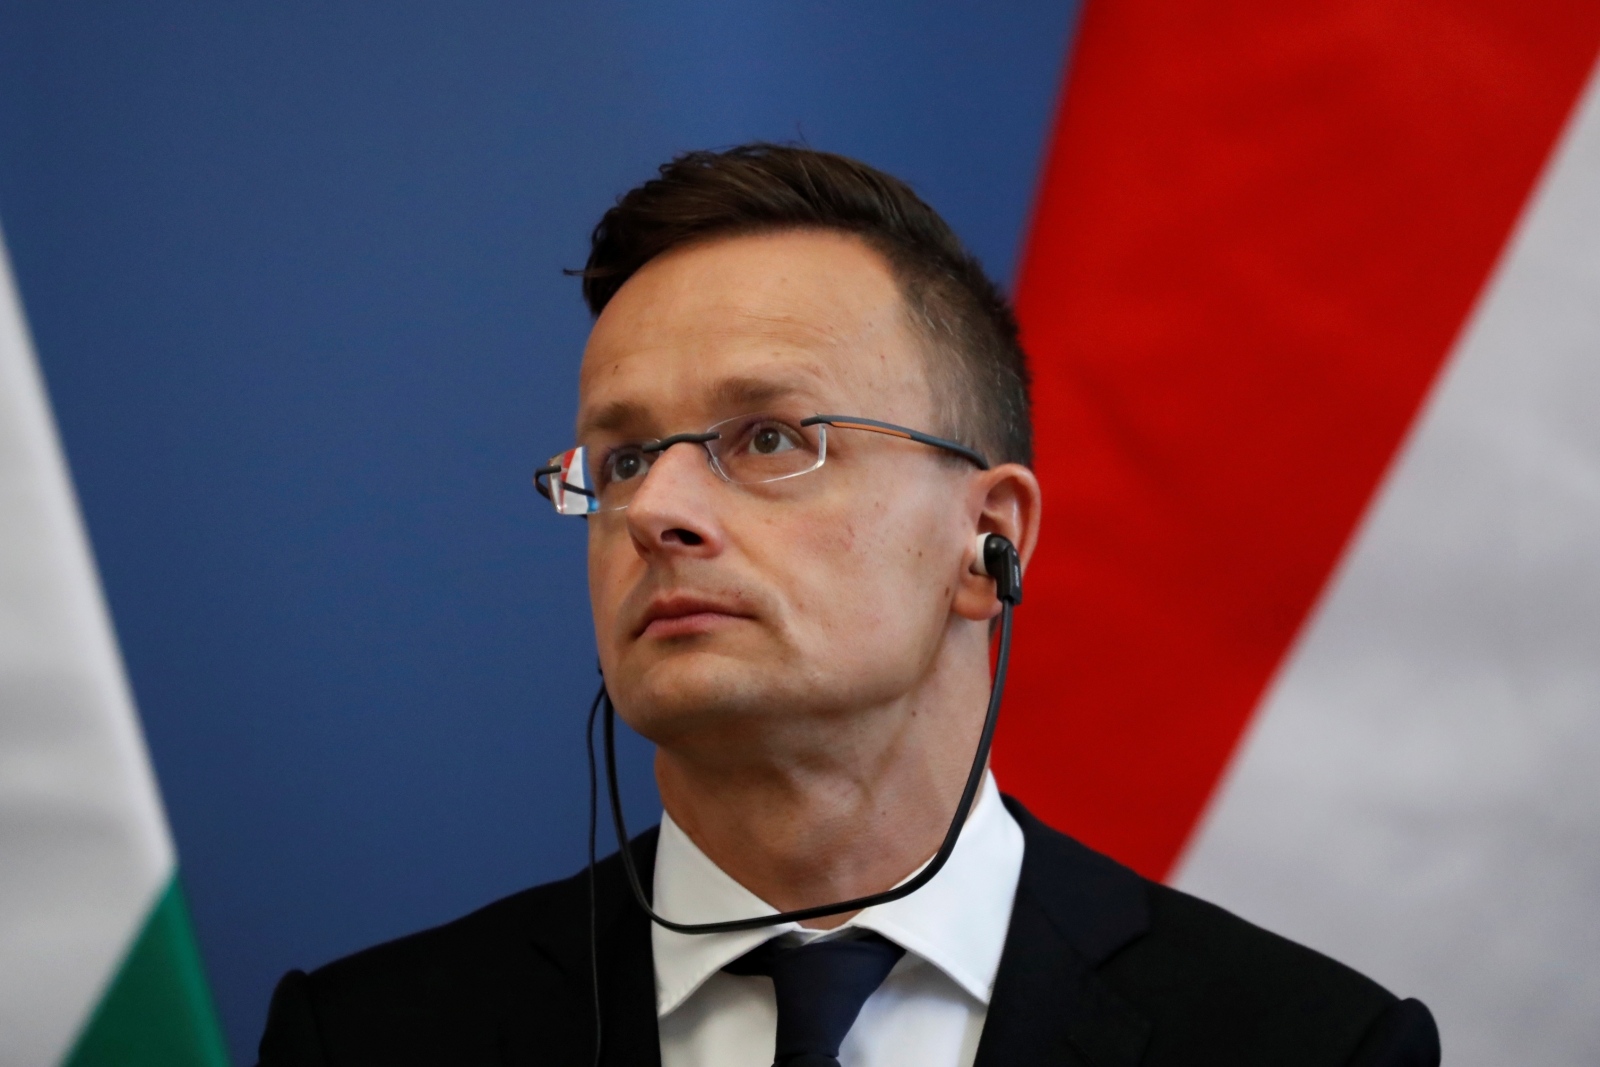 Hungarian Foreign Minister Szijjarto reacts during a news conference with South Korean Foreign Minister Kyung-wha following a boat accident, in Budapest Hungarian Foreign Minister Peter Szijjarto reacts during a news conference with South Korean Foreign Minister Kang Kyung-wha (not pictured) following a boat accident, in Budapest, Hungary, May 31, 2019. REUTERS/Bernadett Szabo BERNADETT SZABO